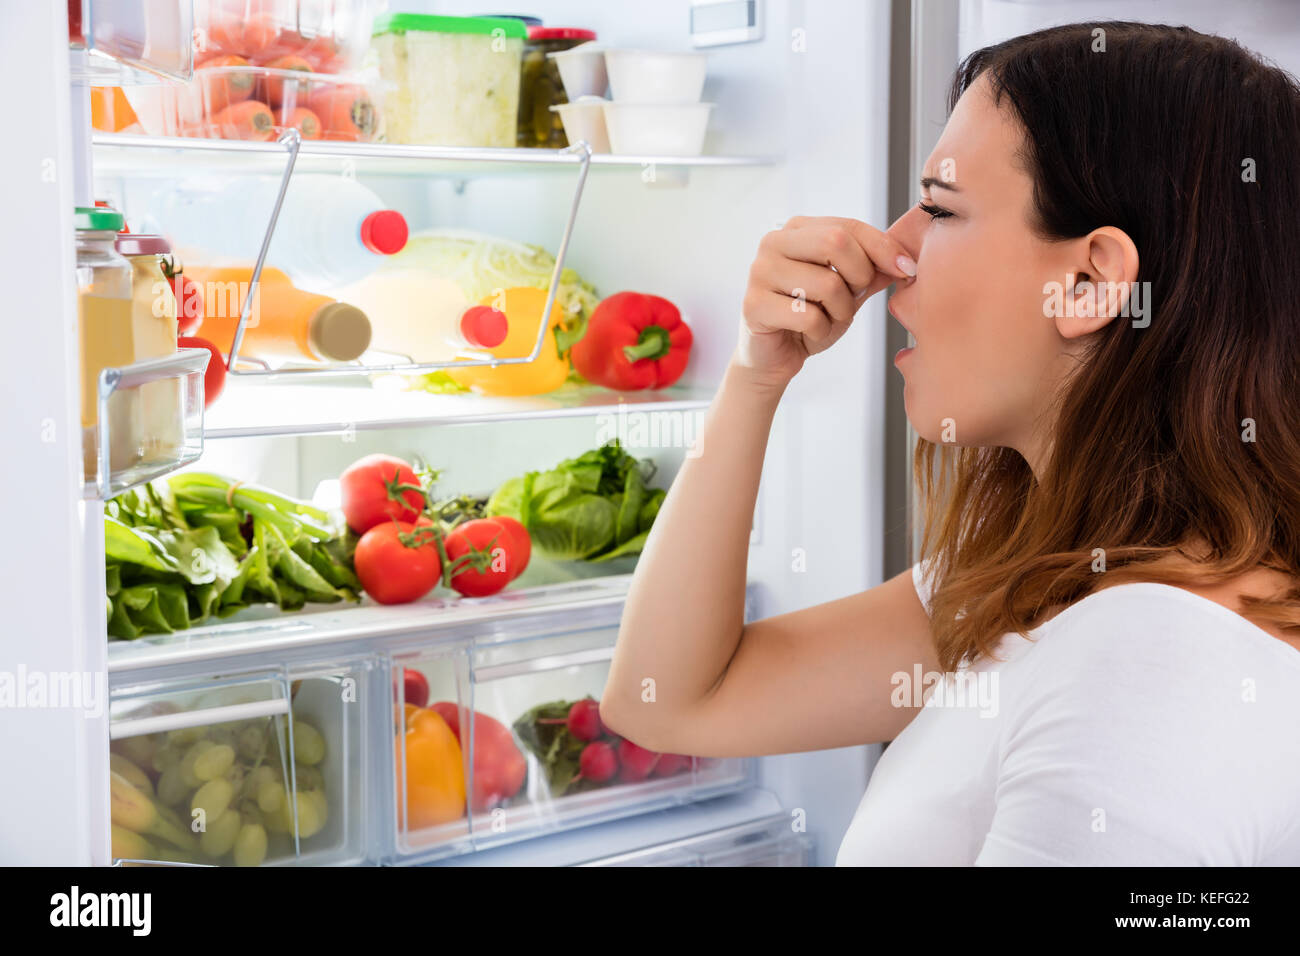 Young Woman Noticed Smell Coming Out Of Refrigerator Stock Photo